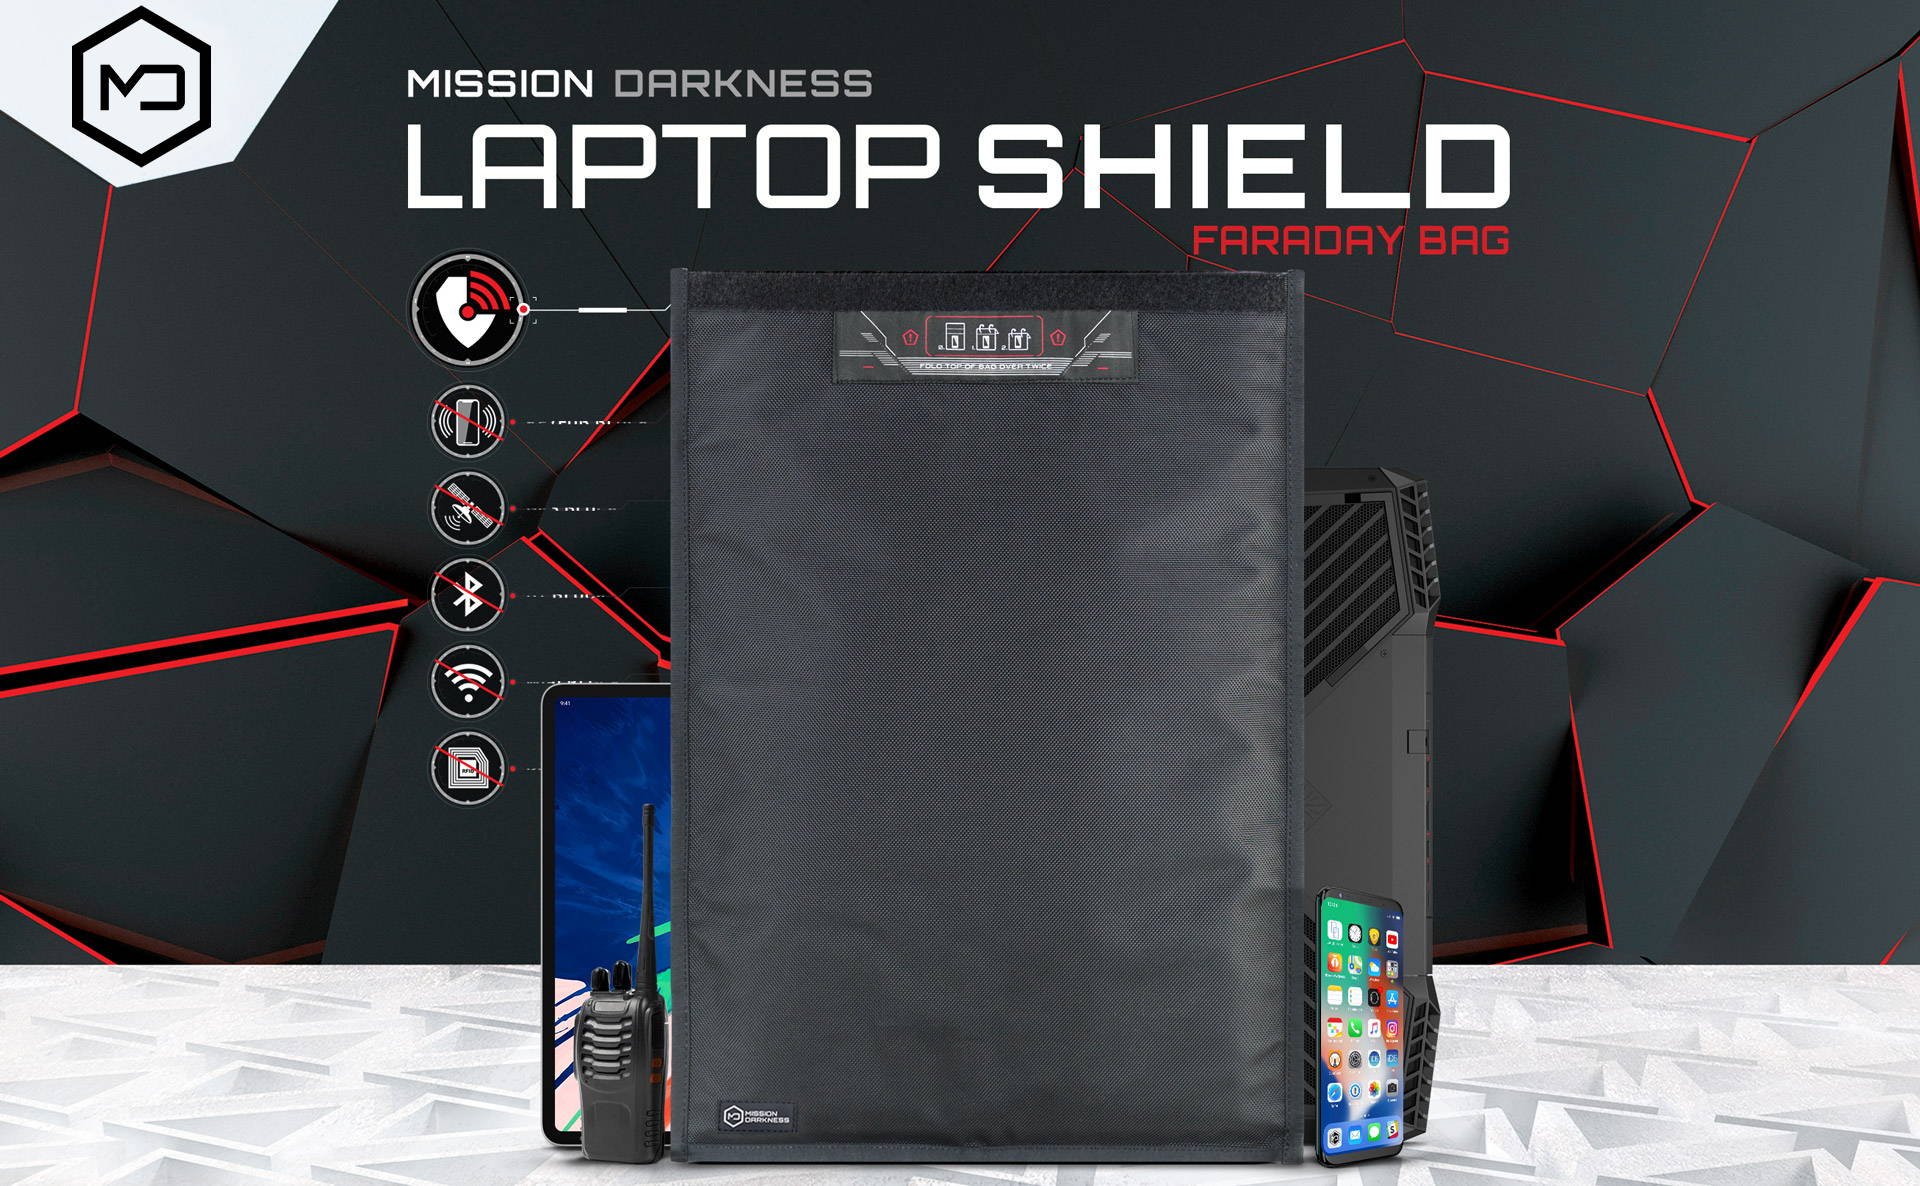 Mission Darkness Non-window Faraday Bag for Laptops signal blocking computer sleeve prevents hacking